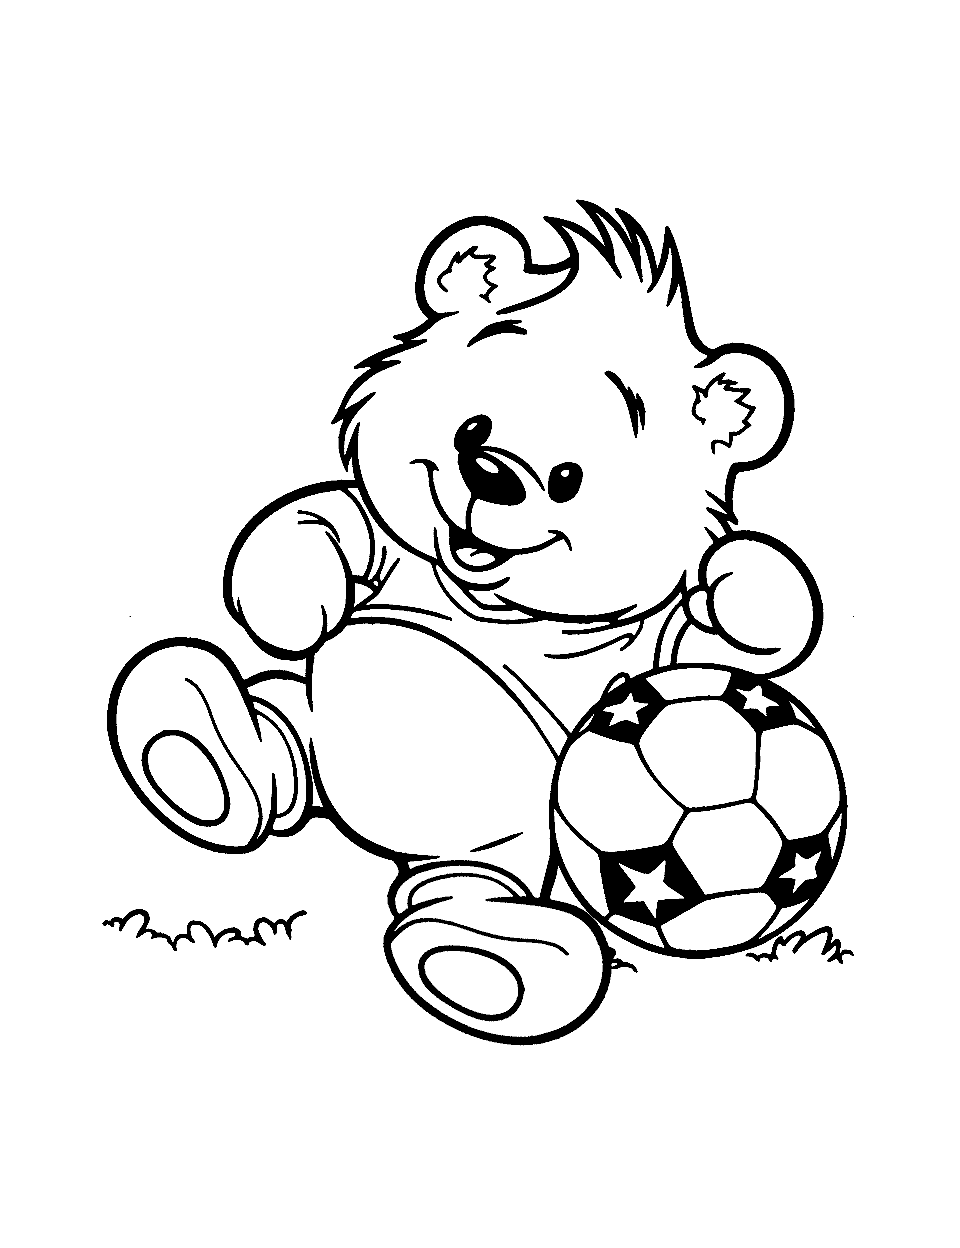 Sporty Teddy Bear Coloring Page - A teddy bear playing with a soccer ball.